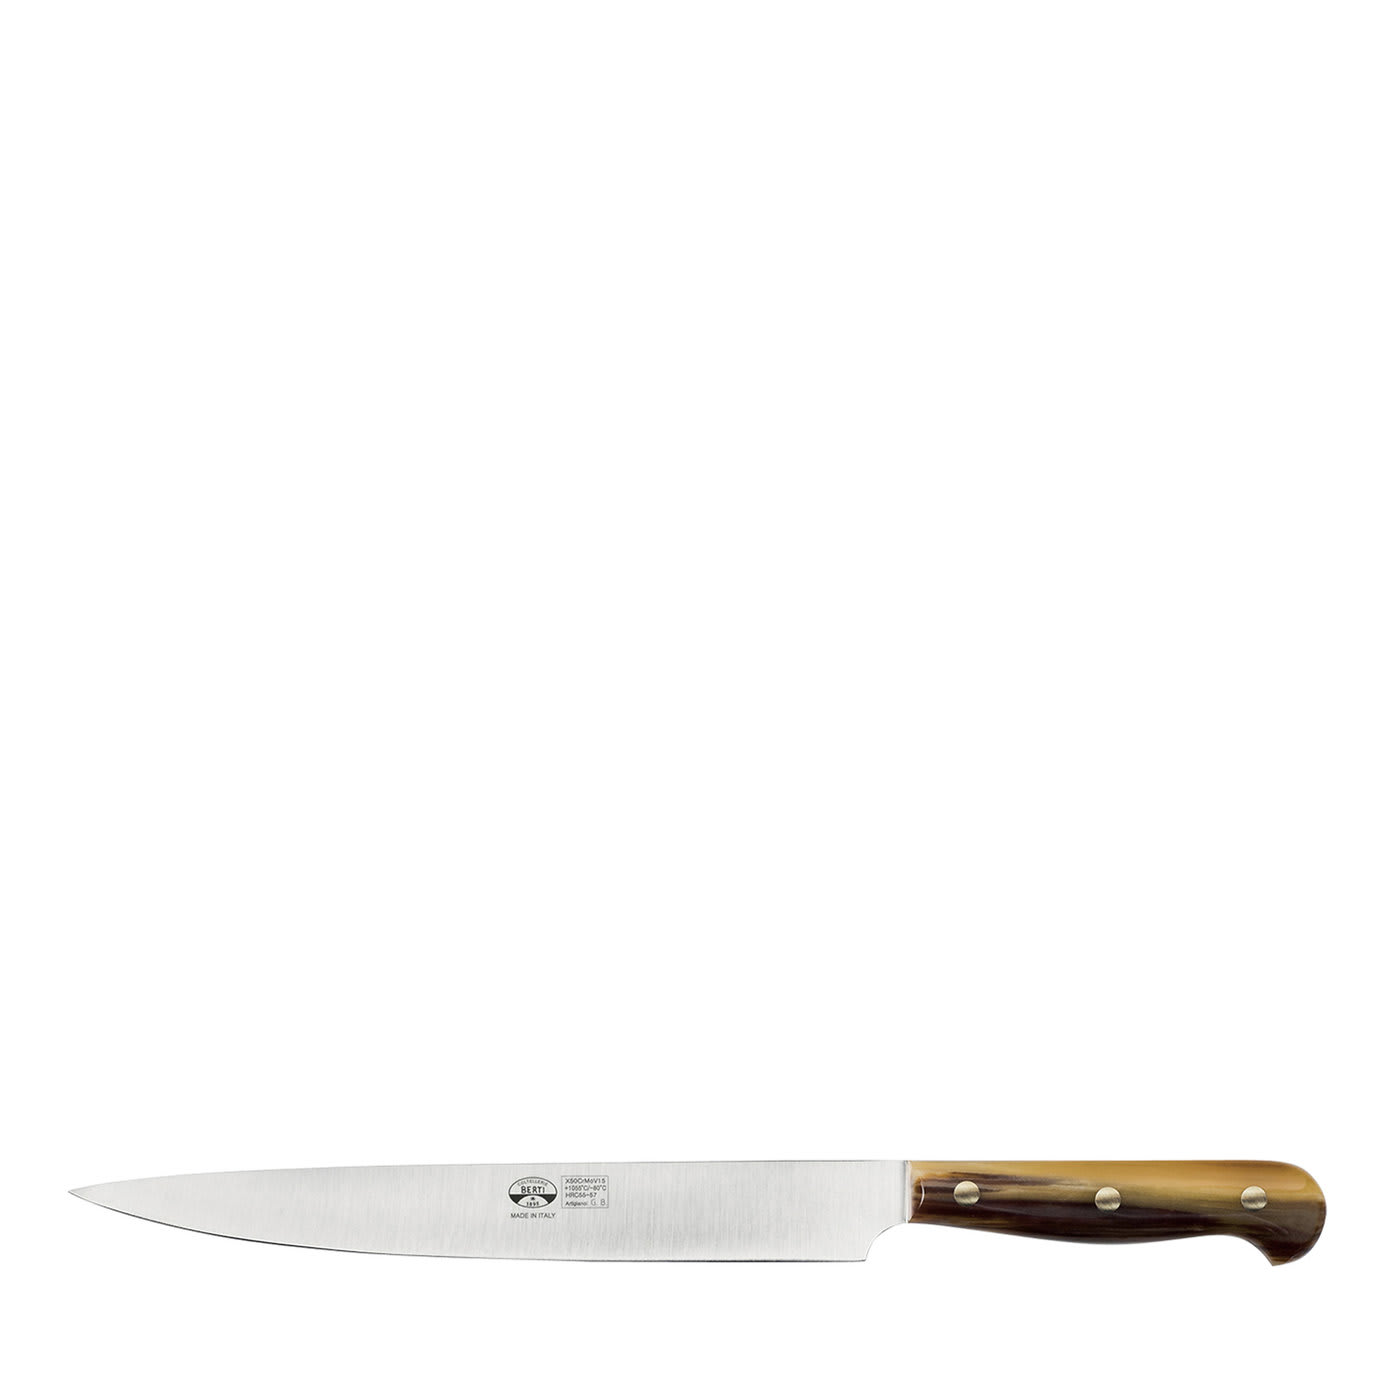 Roasts and Cold Cuts Knife with Cornotech Handle - Coltellerie Berti